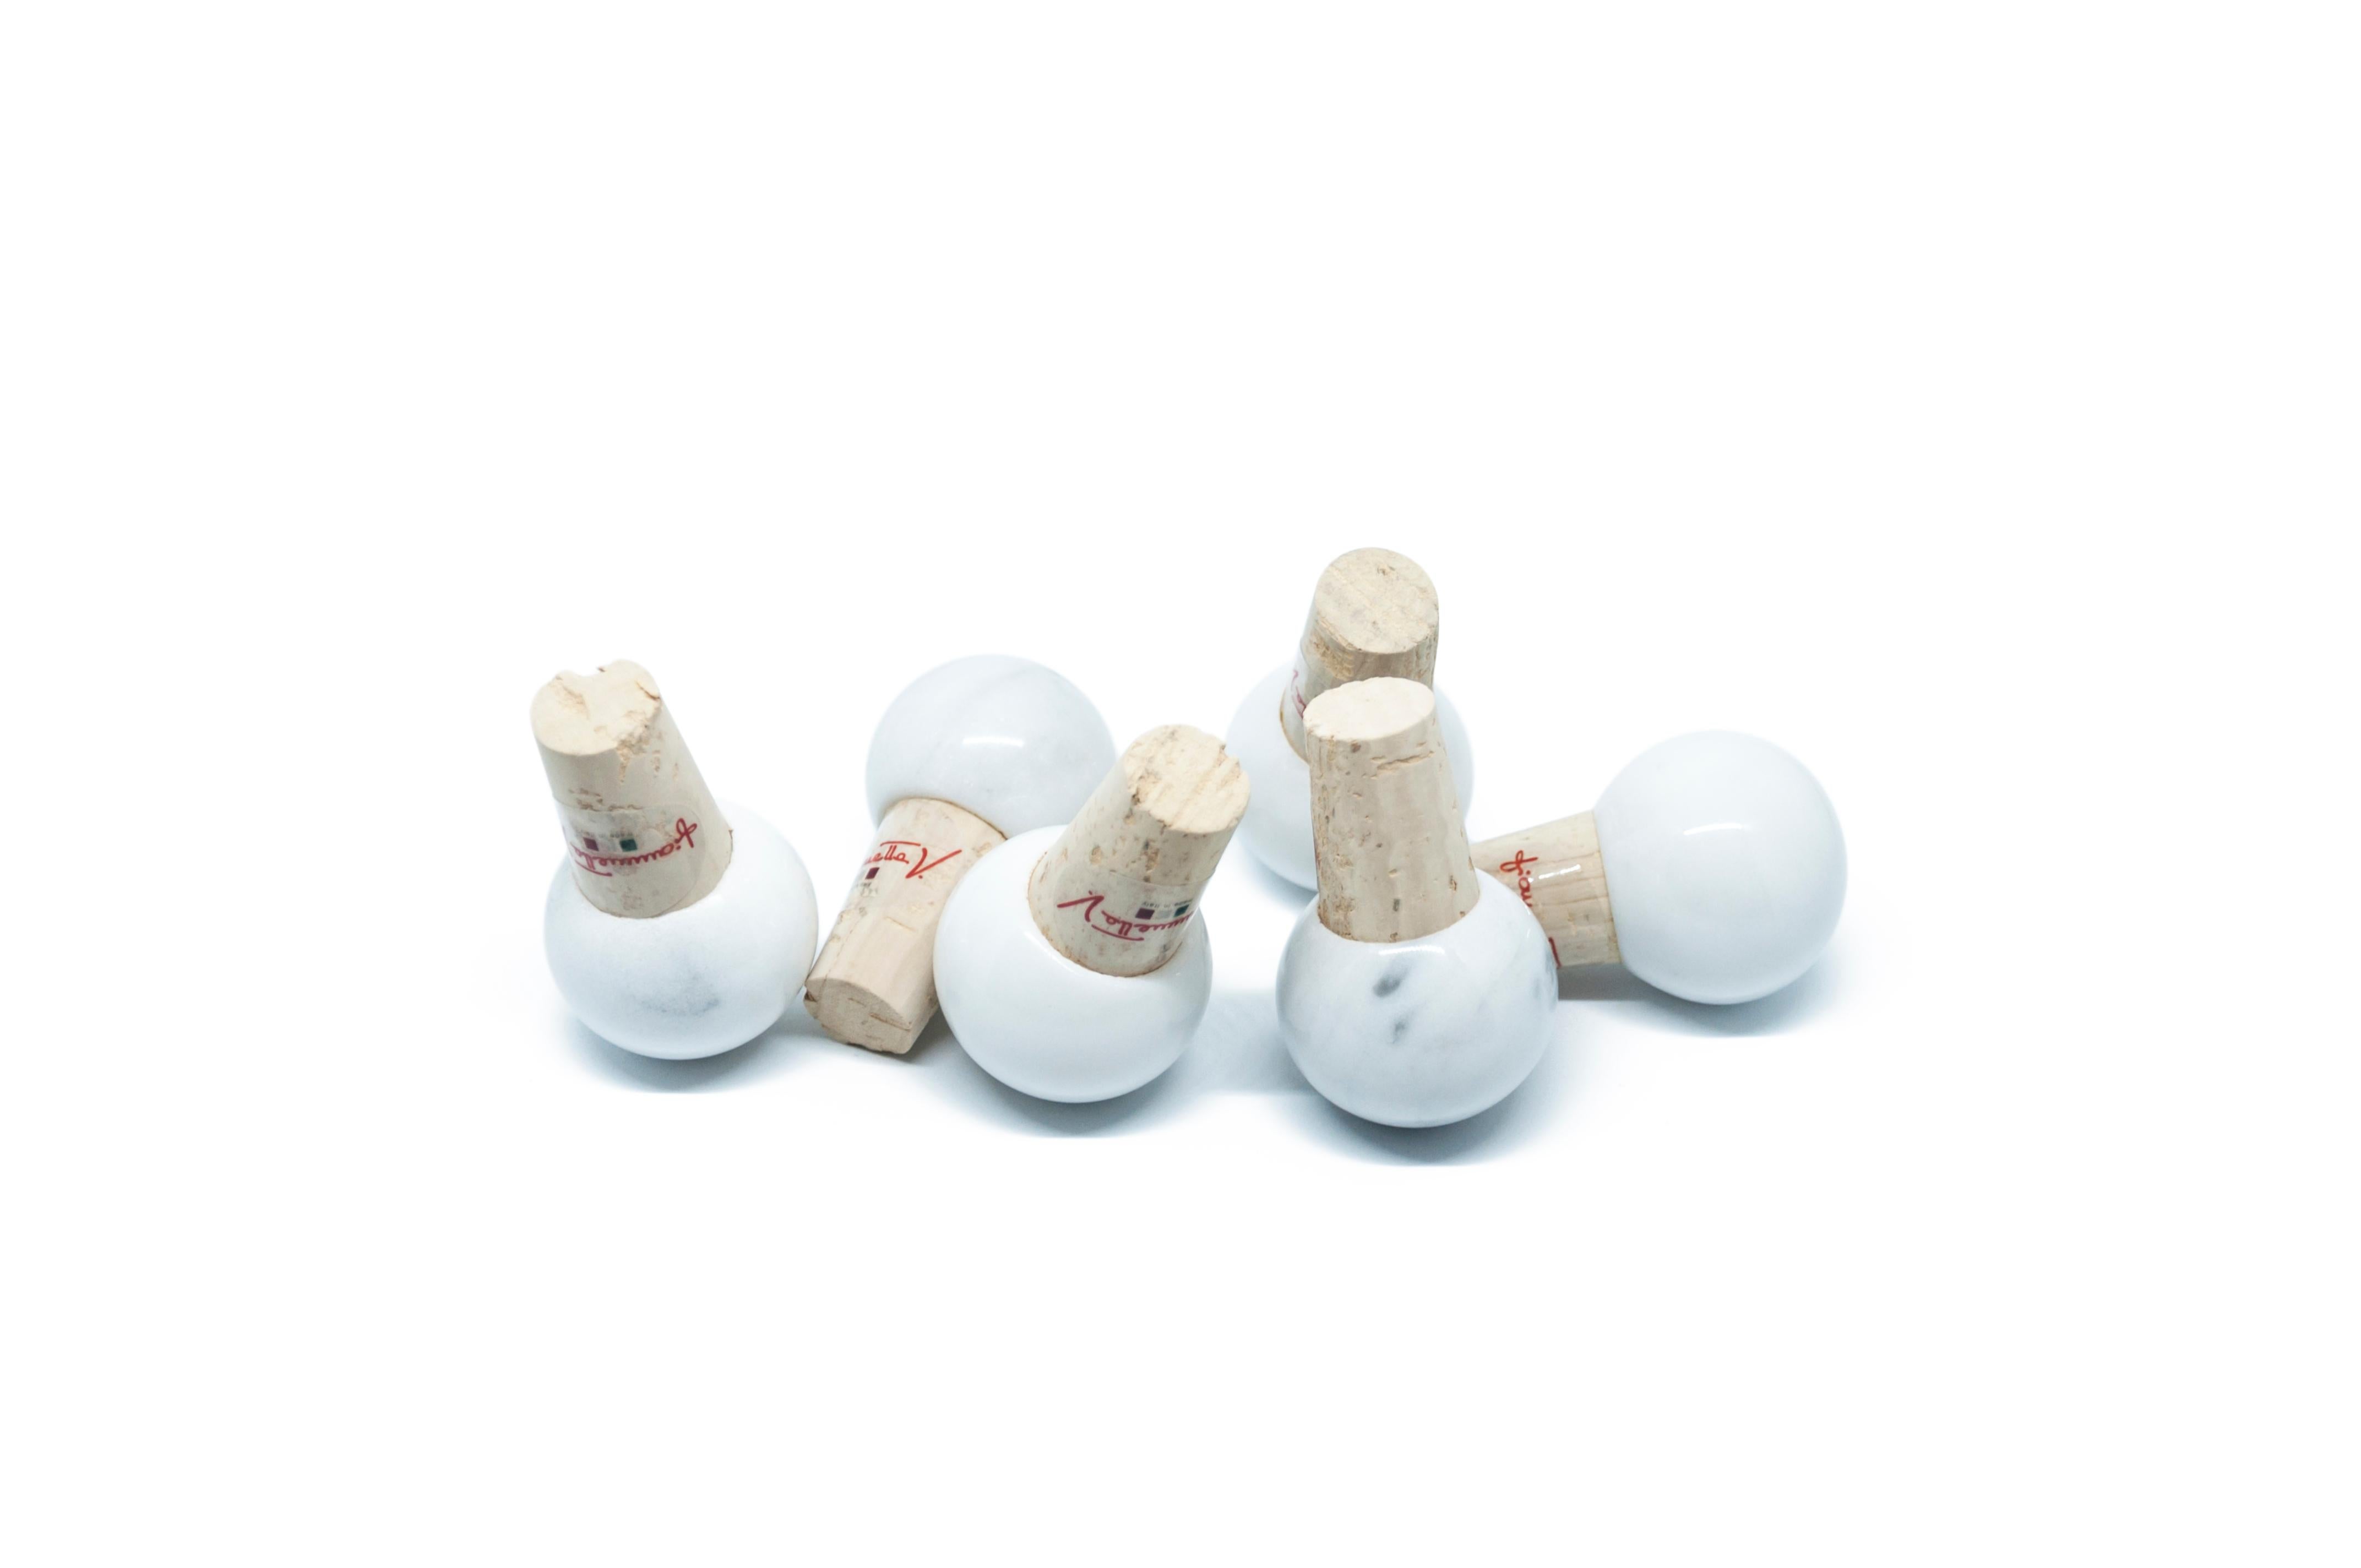 Set of 6 bottle stoppers in white Carrara marble and cork, ideal for wine and olive oil glass bottles.

Each piece is in a way unique (since each marble block is different in veins and shades) and handcrafted in Italy. Slight variations in shape,